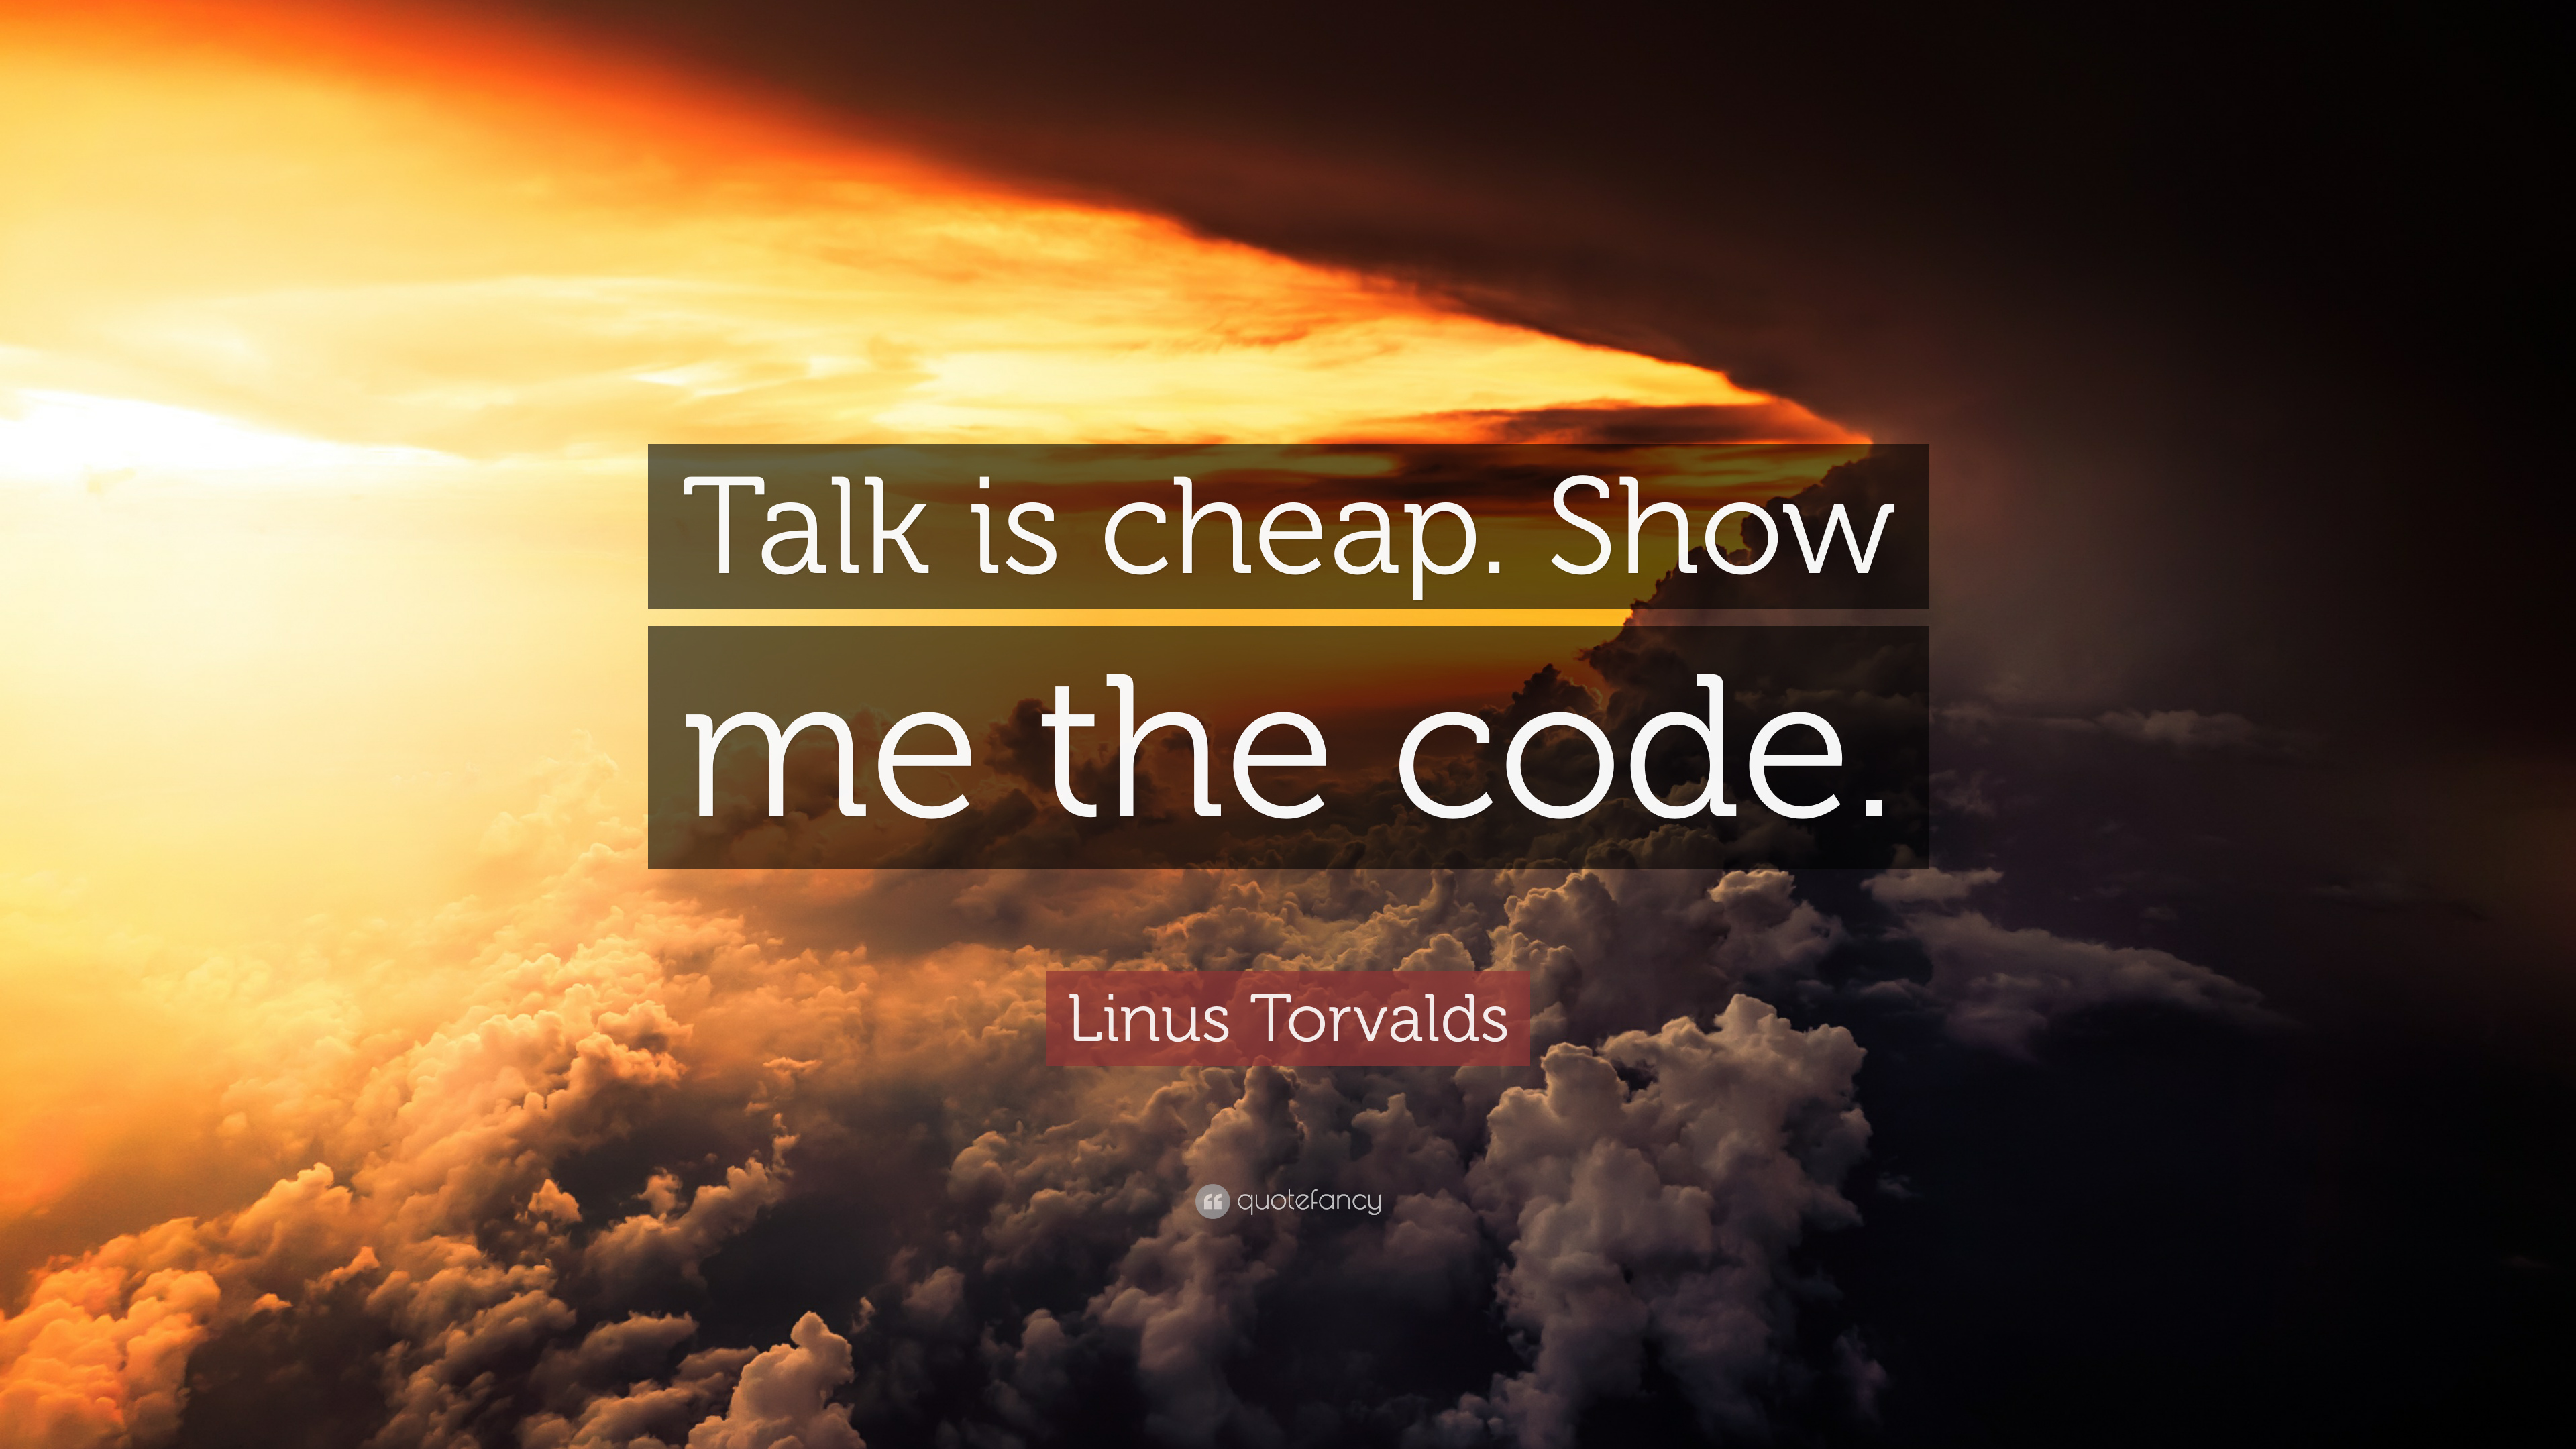 Linus Torvalds Quote: “Talk is cheap. Show me the code.”